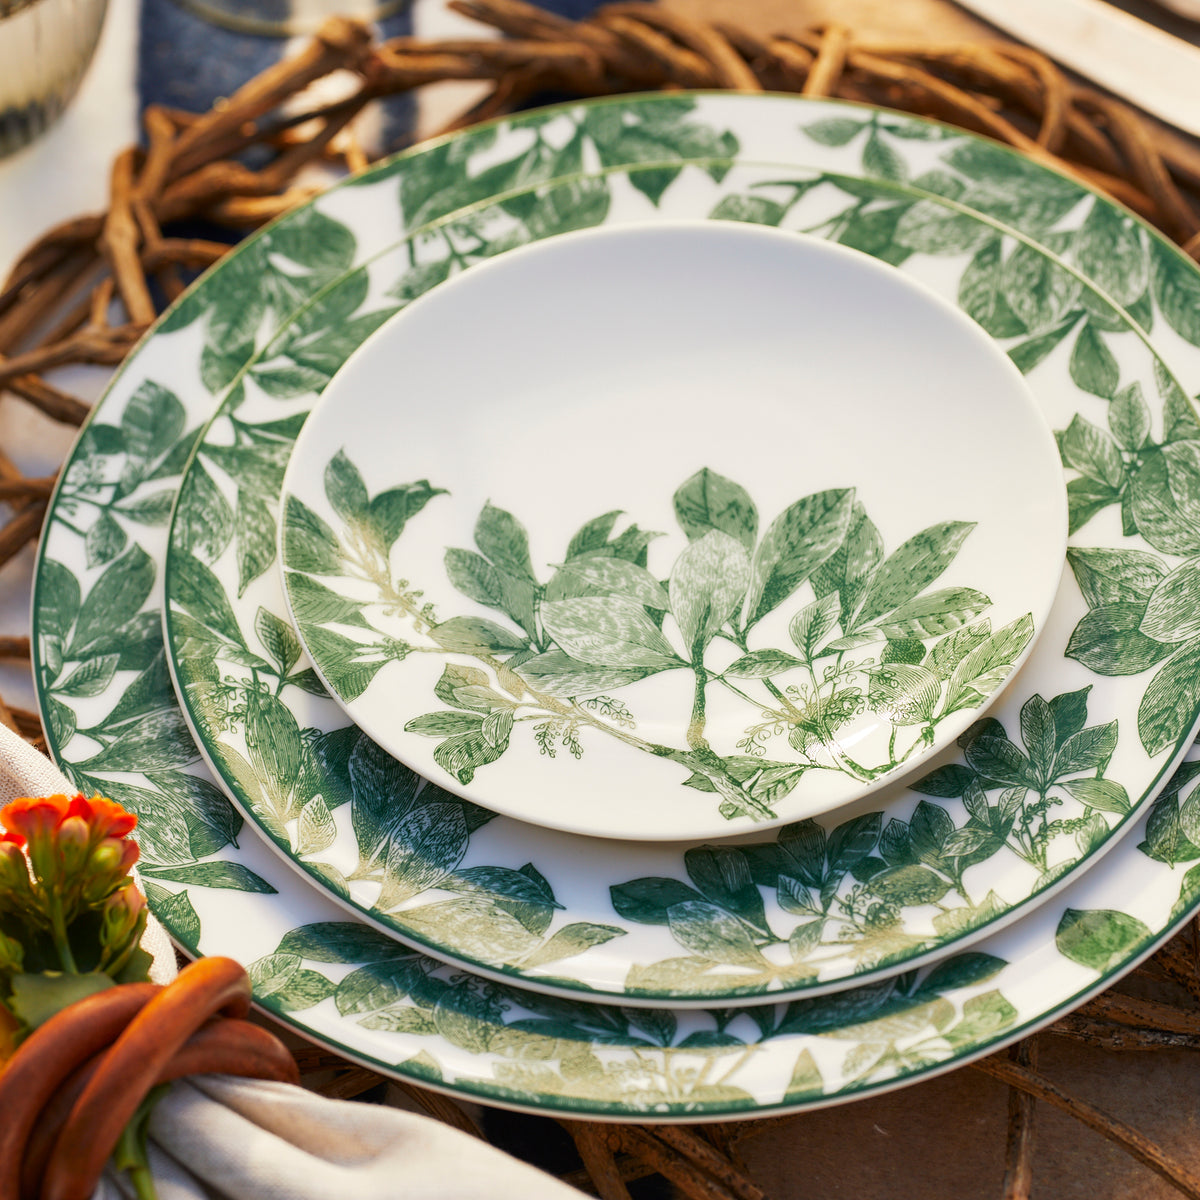 A set of three Caskata Arbor Green Small Plates with green leaf patterns is neatly stacked, placed on a braided charger. A small orange flower is partly visible in the foreground, adding a touch of color to the botanical dinnerware. These plates are also dishwasher safe for easy cleanup.